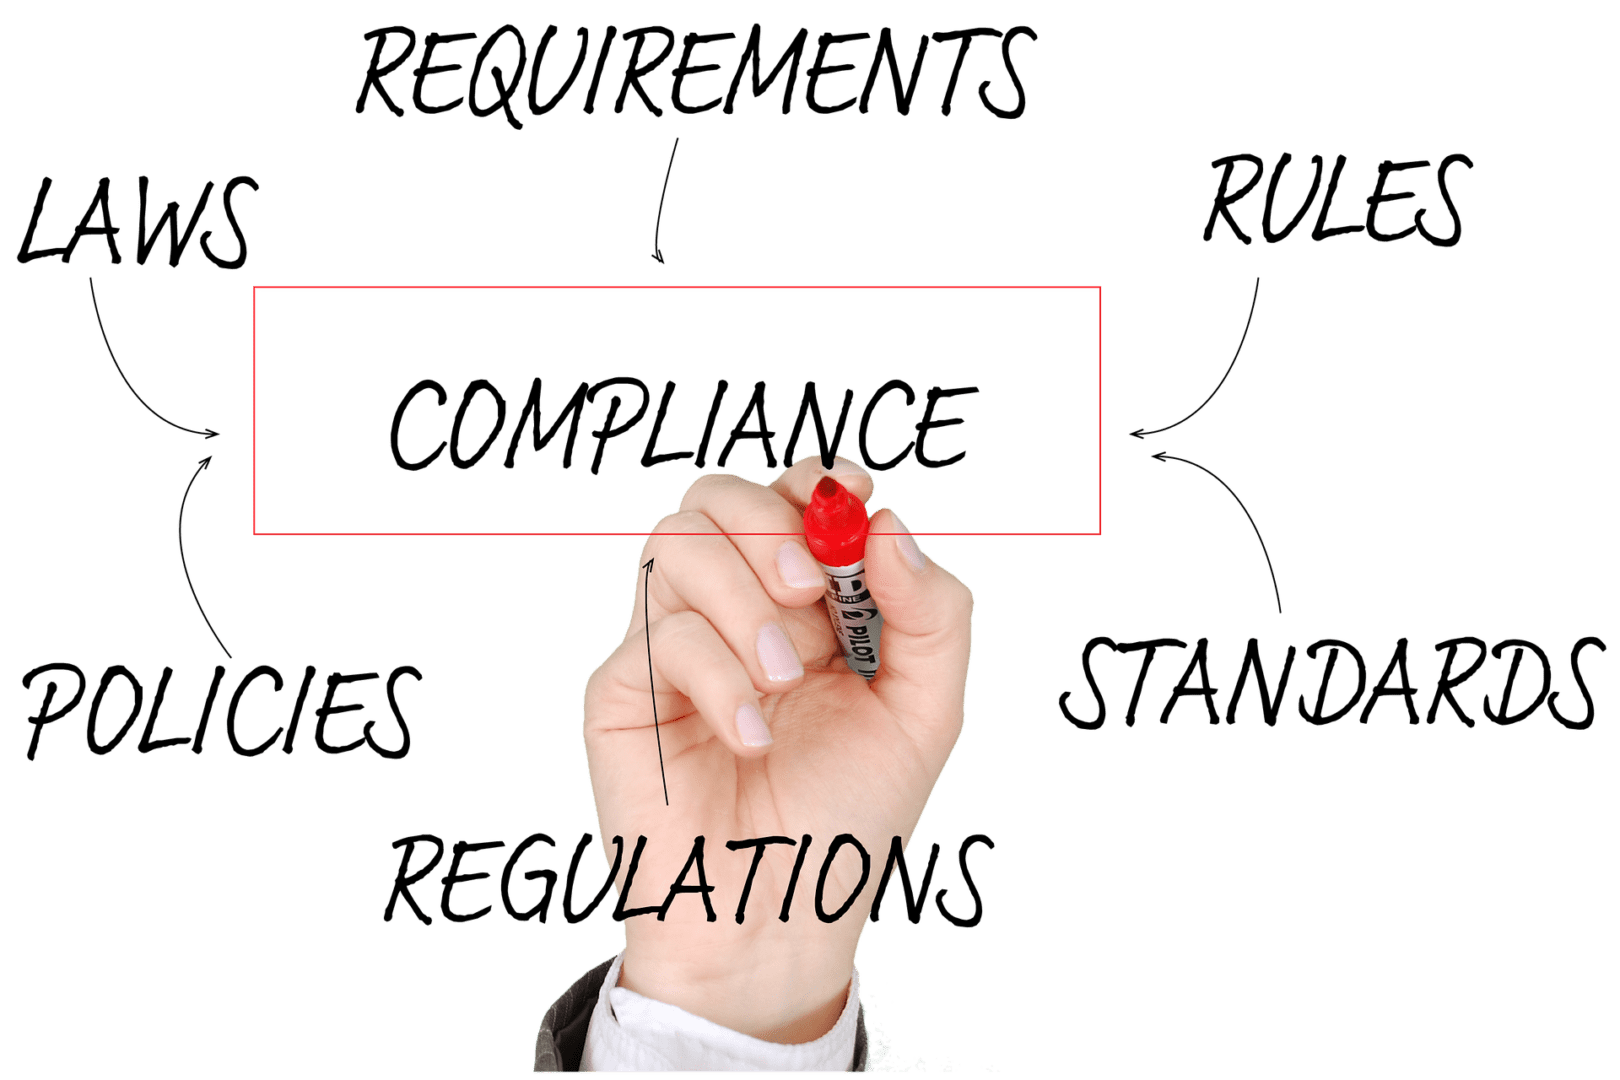 Crucial Points about Compliance